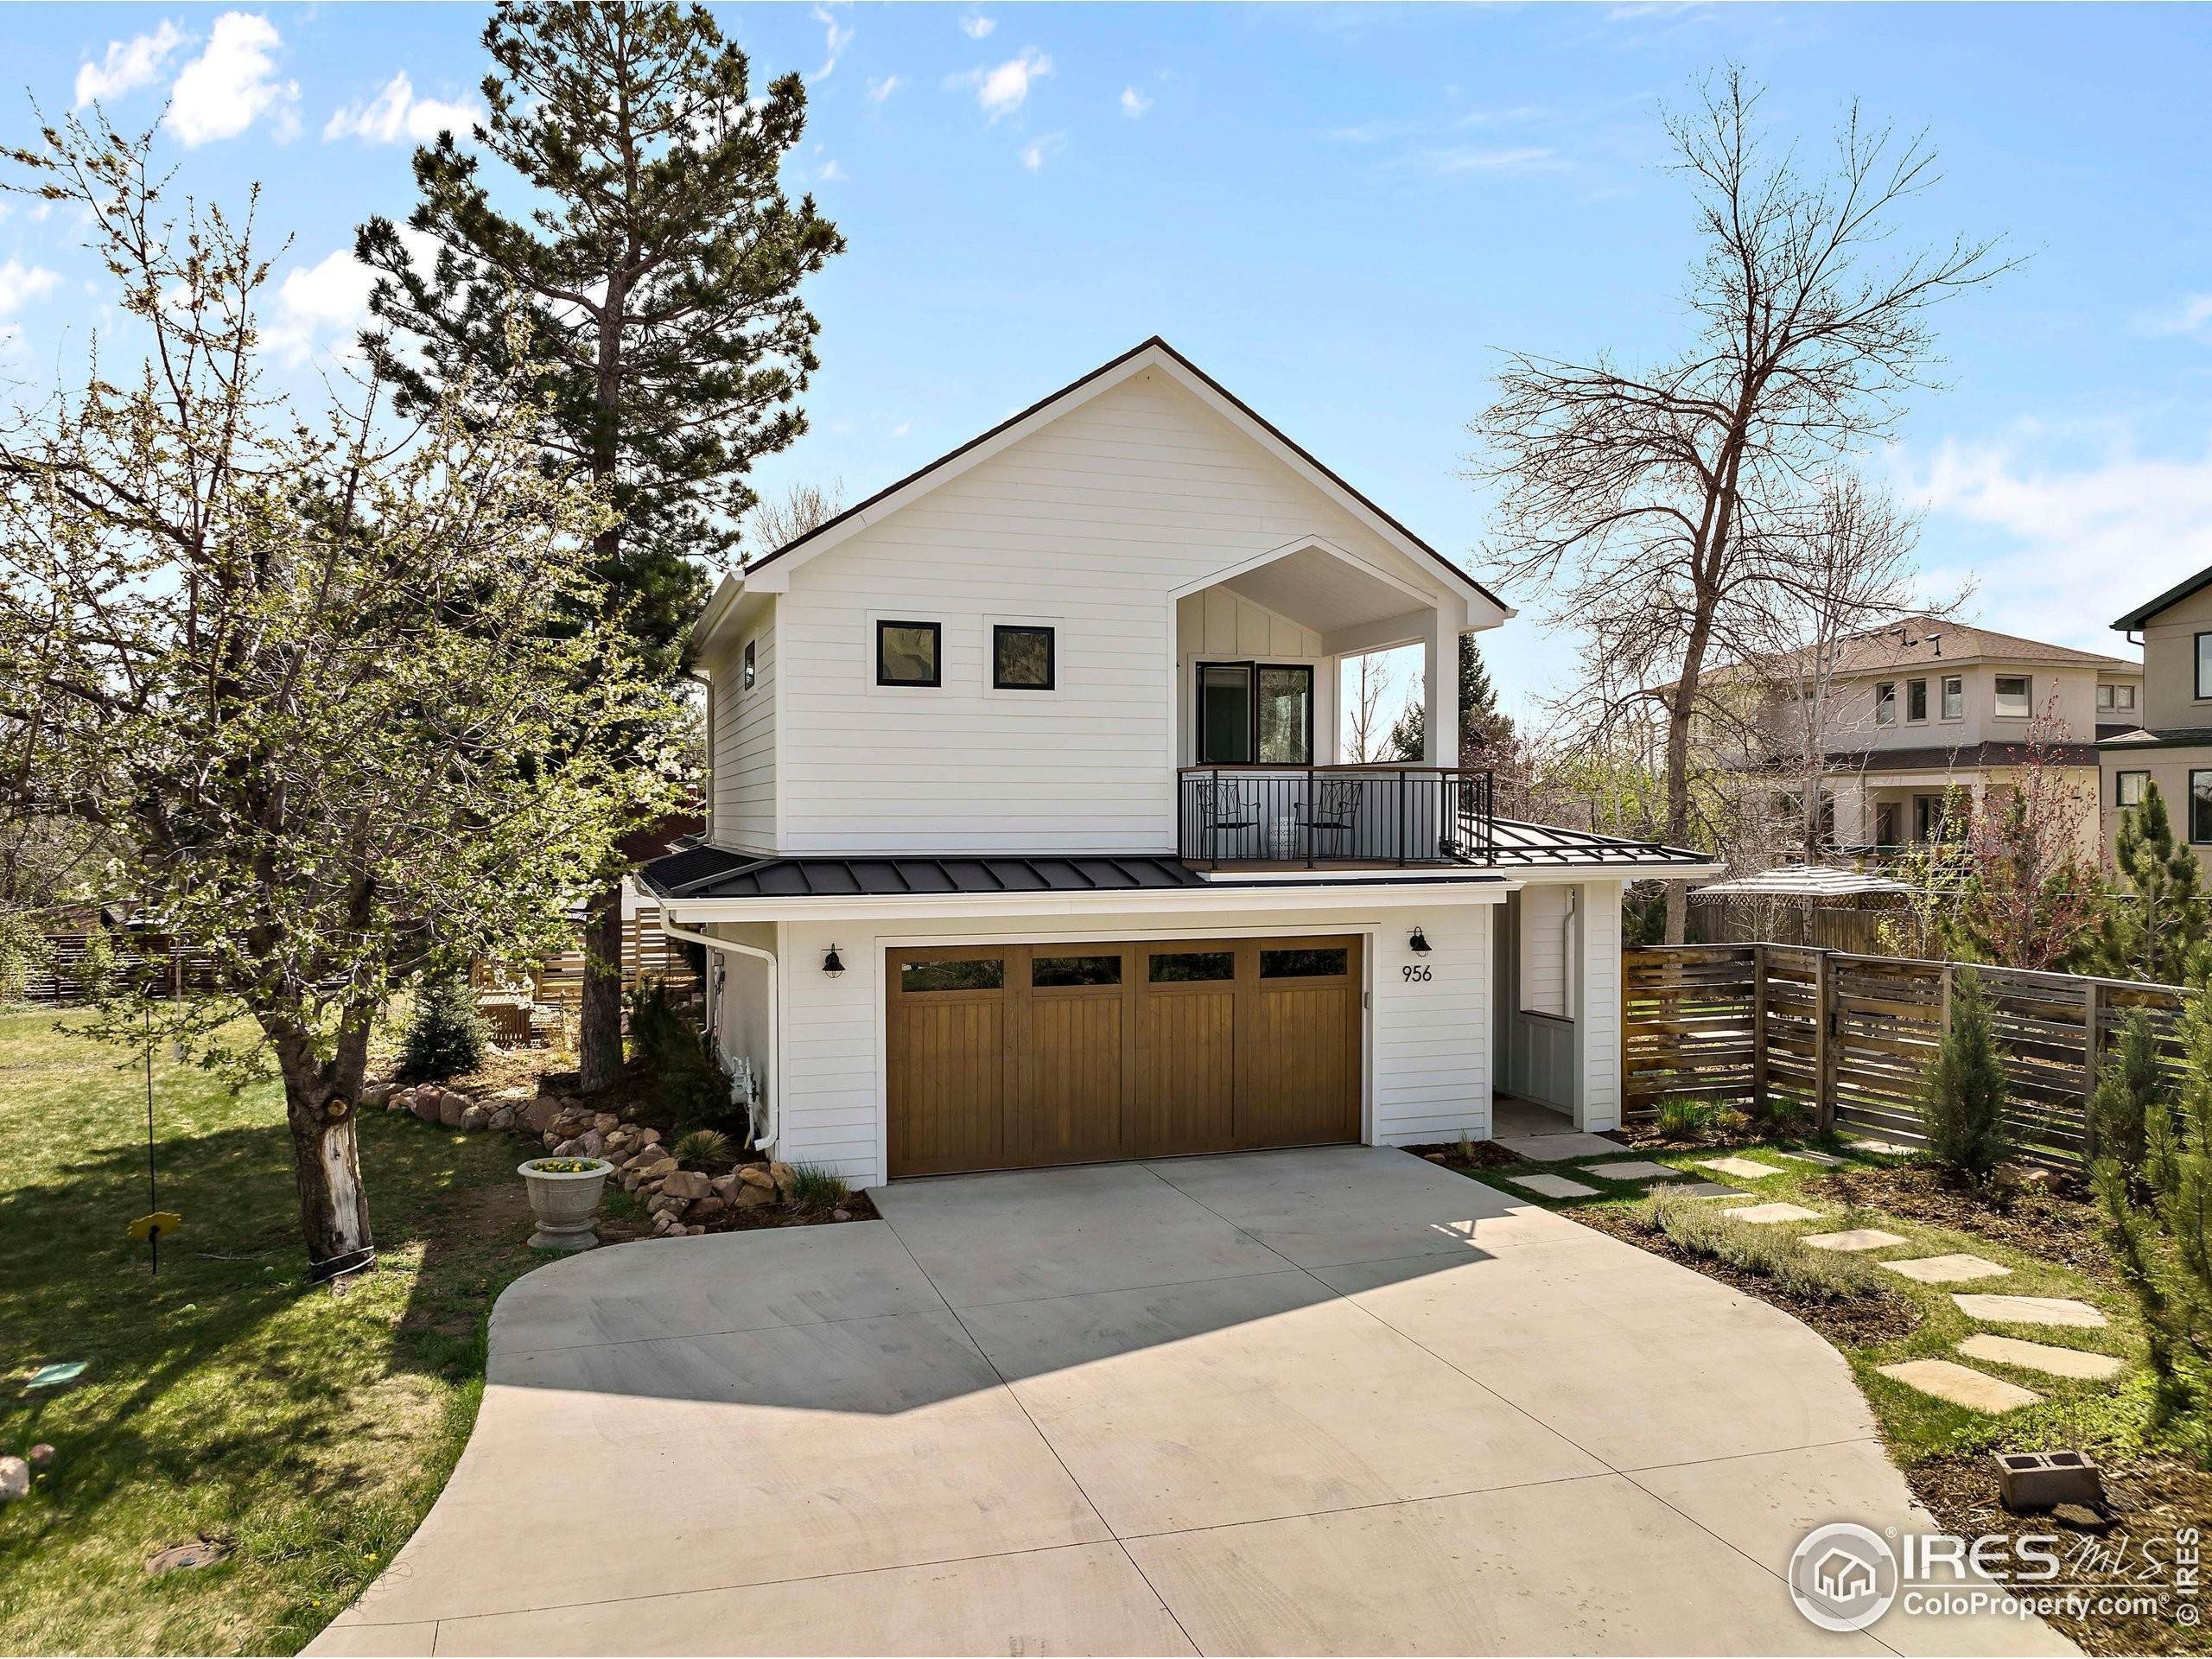 Single Family Homes for Active at 956 Quince Avenue Boulder, Colorado 80304 United States